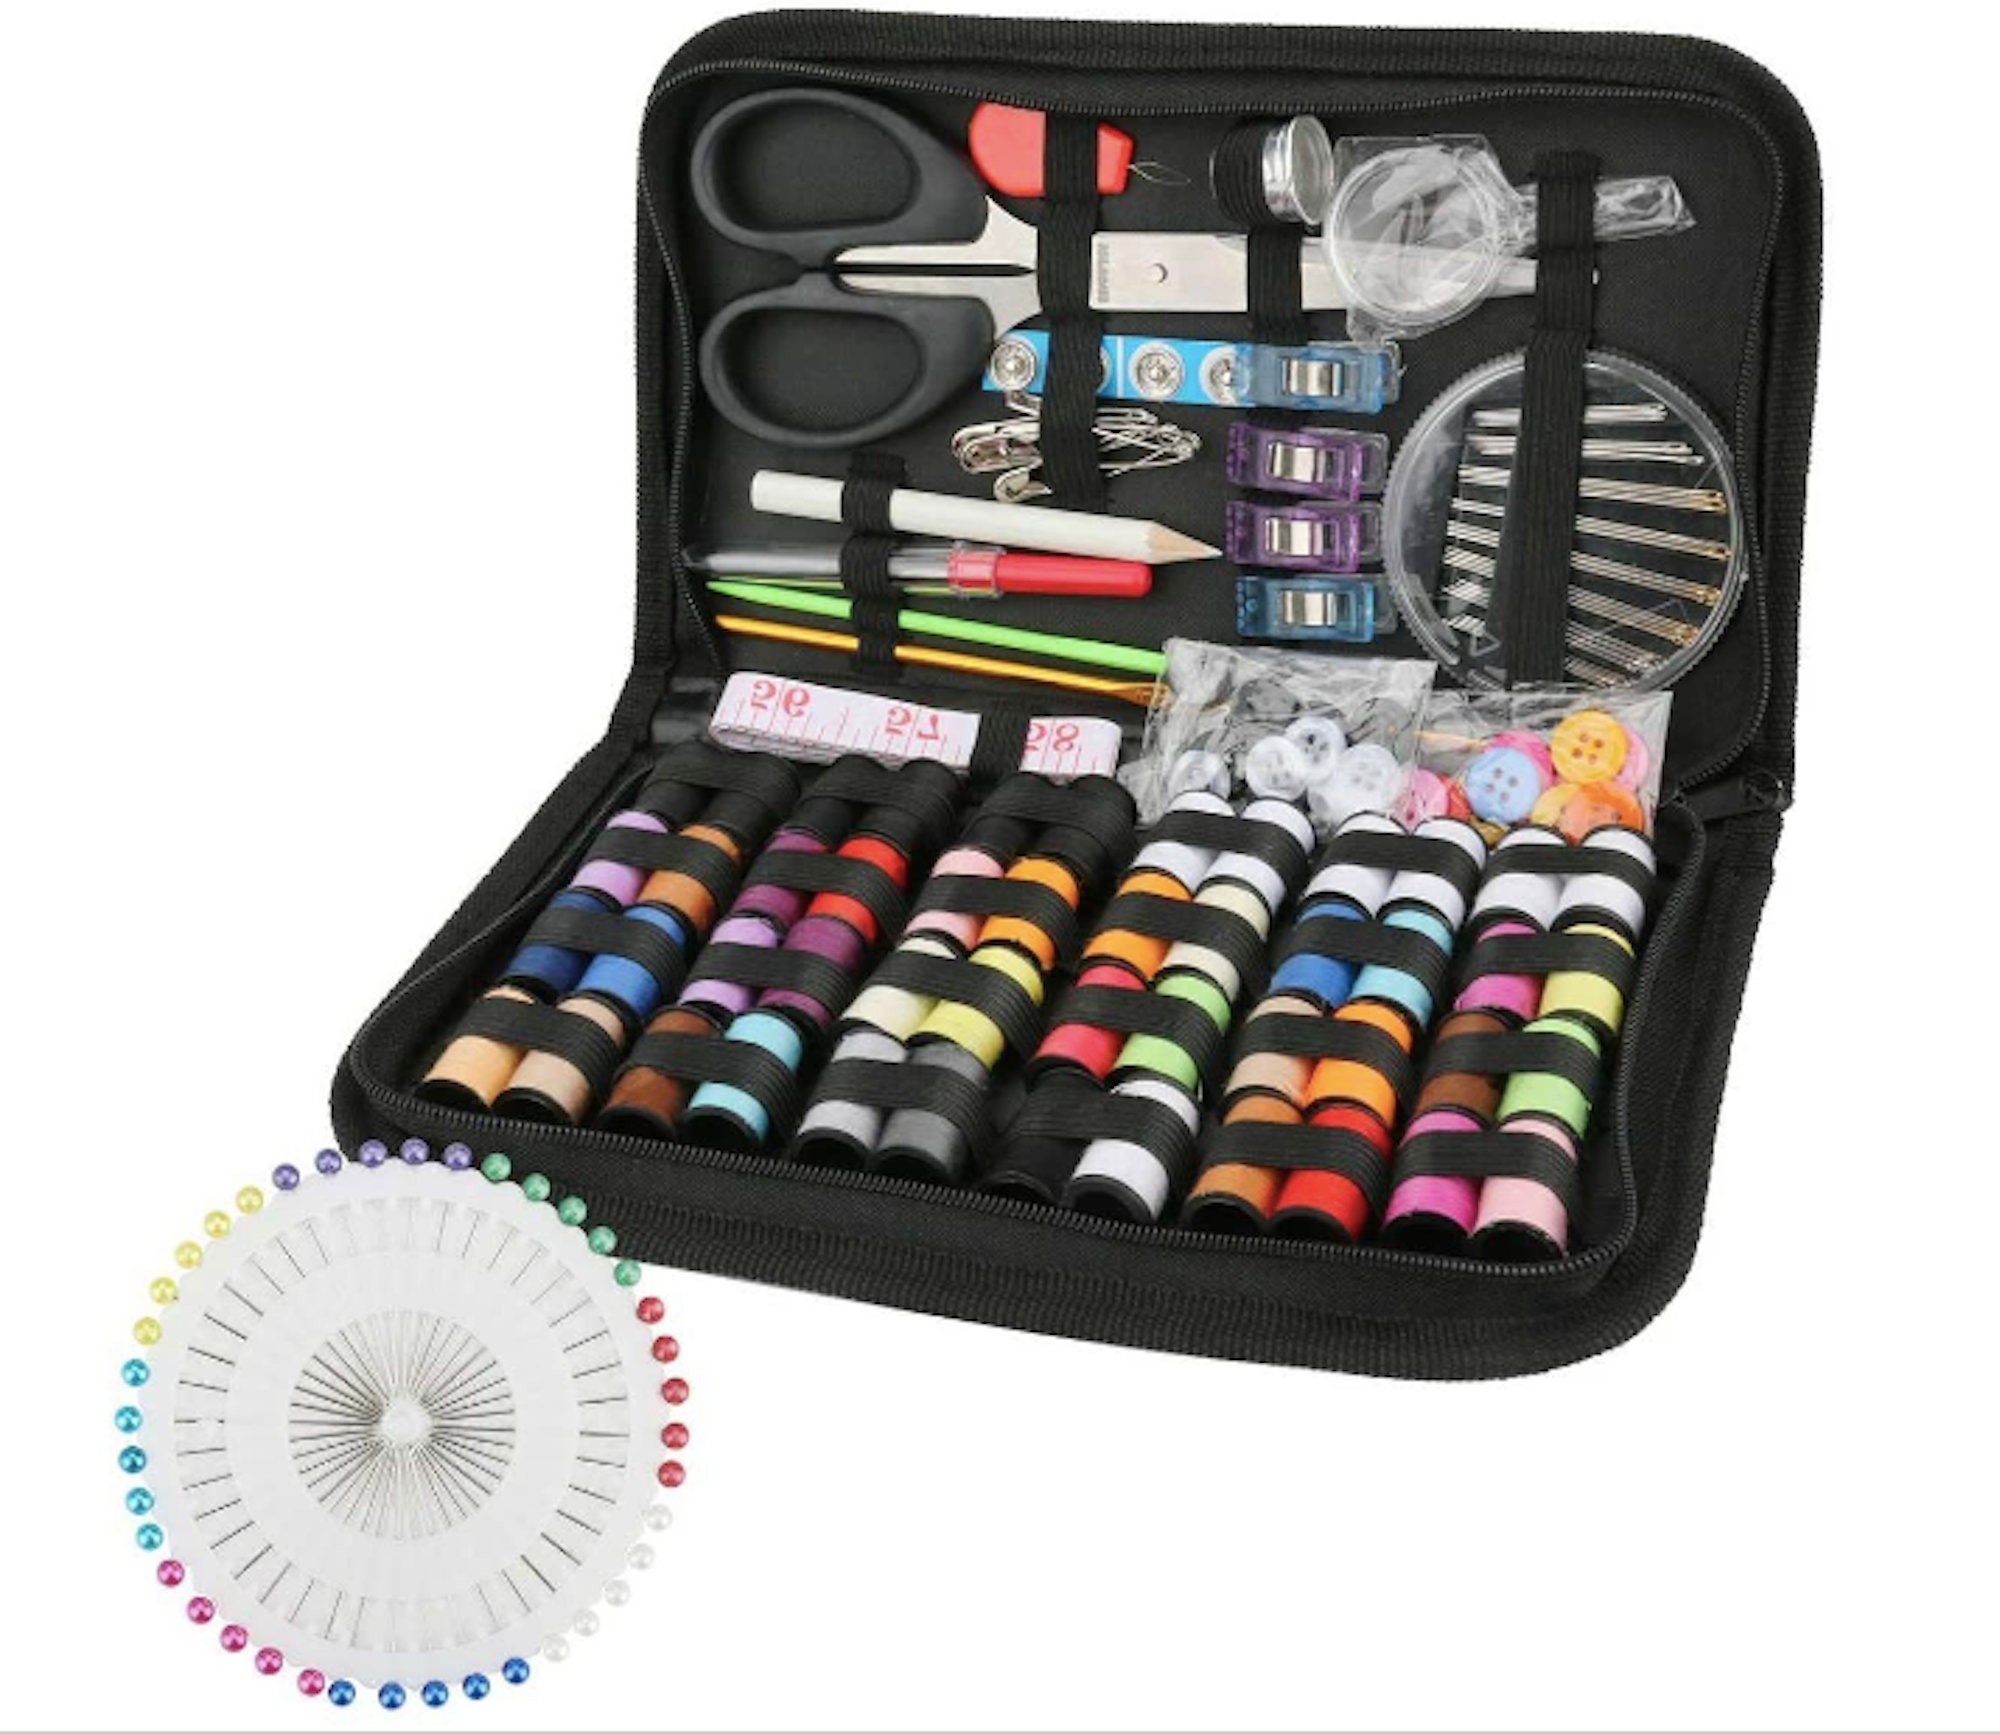 Marcoon Sewing Kit, Zipper Portable Mini Sewing Kits for Adults, Kids,  Traveler, Beginner, Emergency, Family Repair, Sewing Supplies